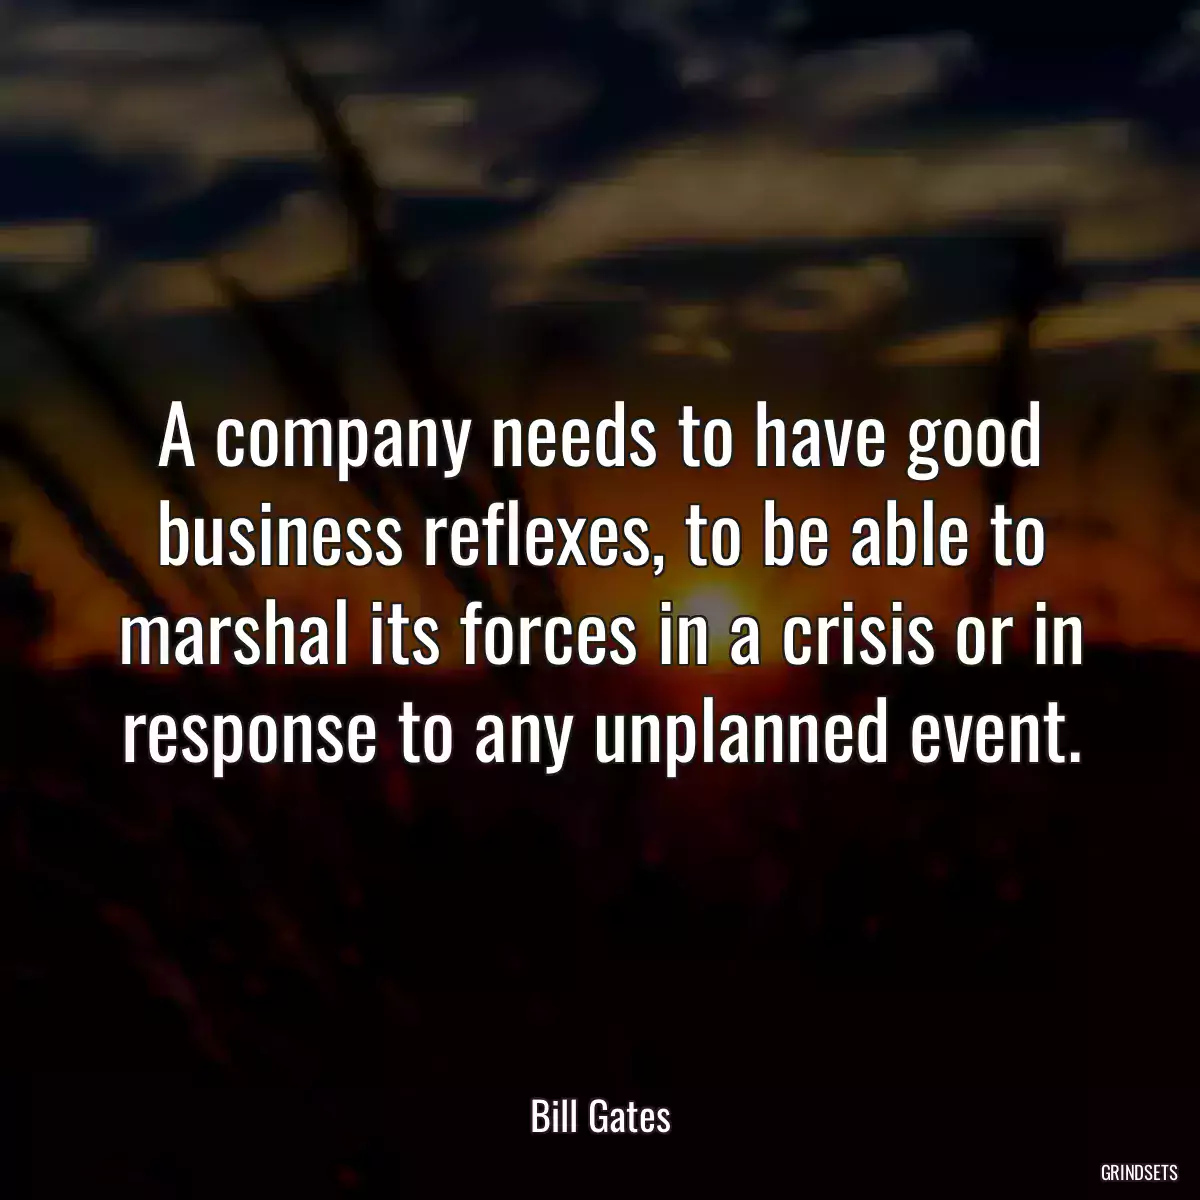 A company needs to have good business reflexes, to be able to marshal its forces in a crisis or in response to any unplanned event.